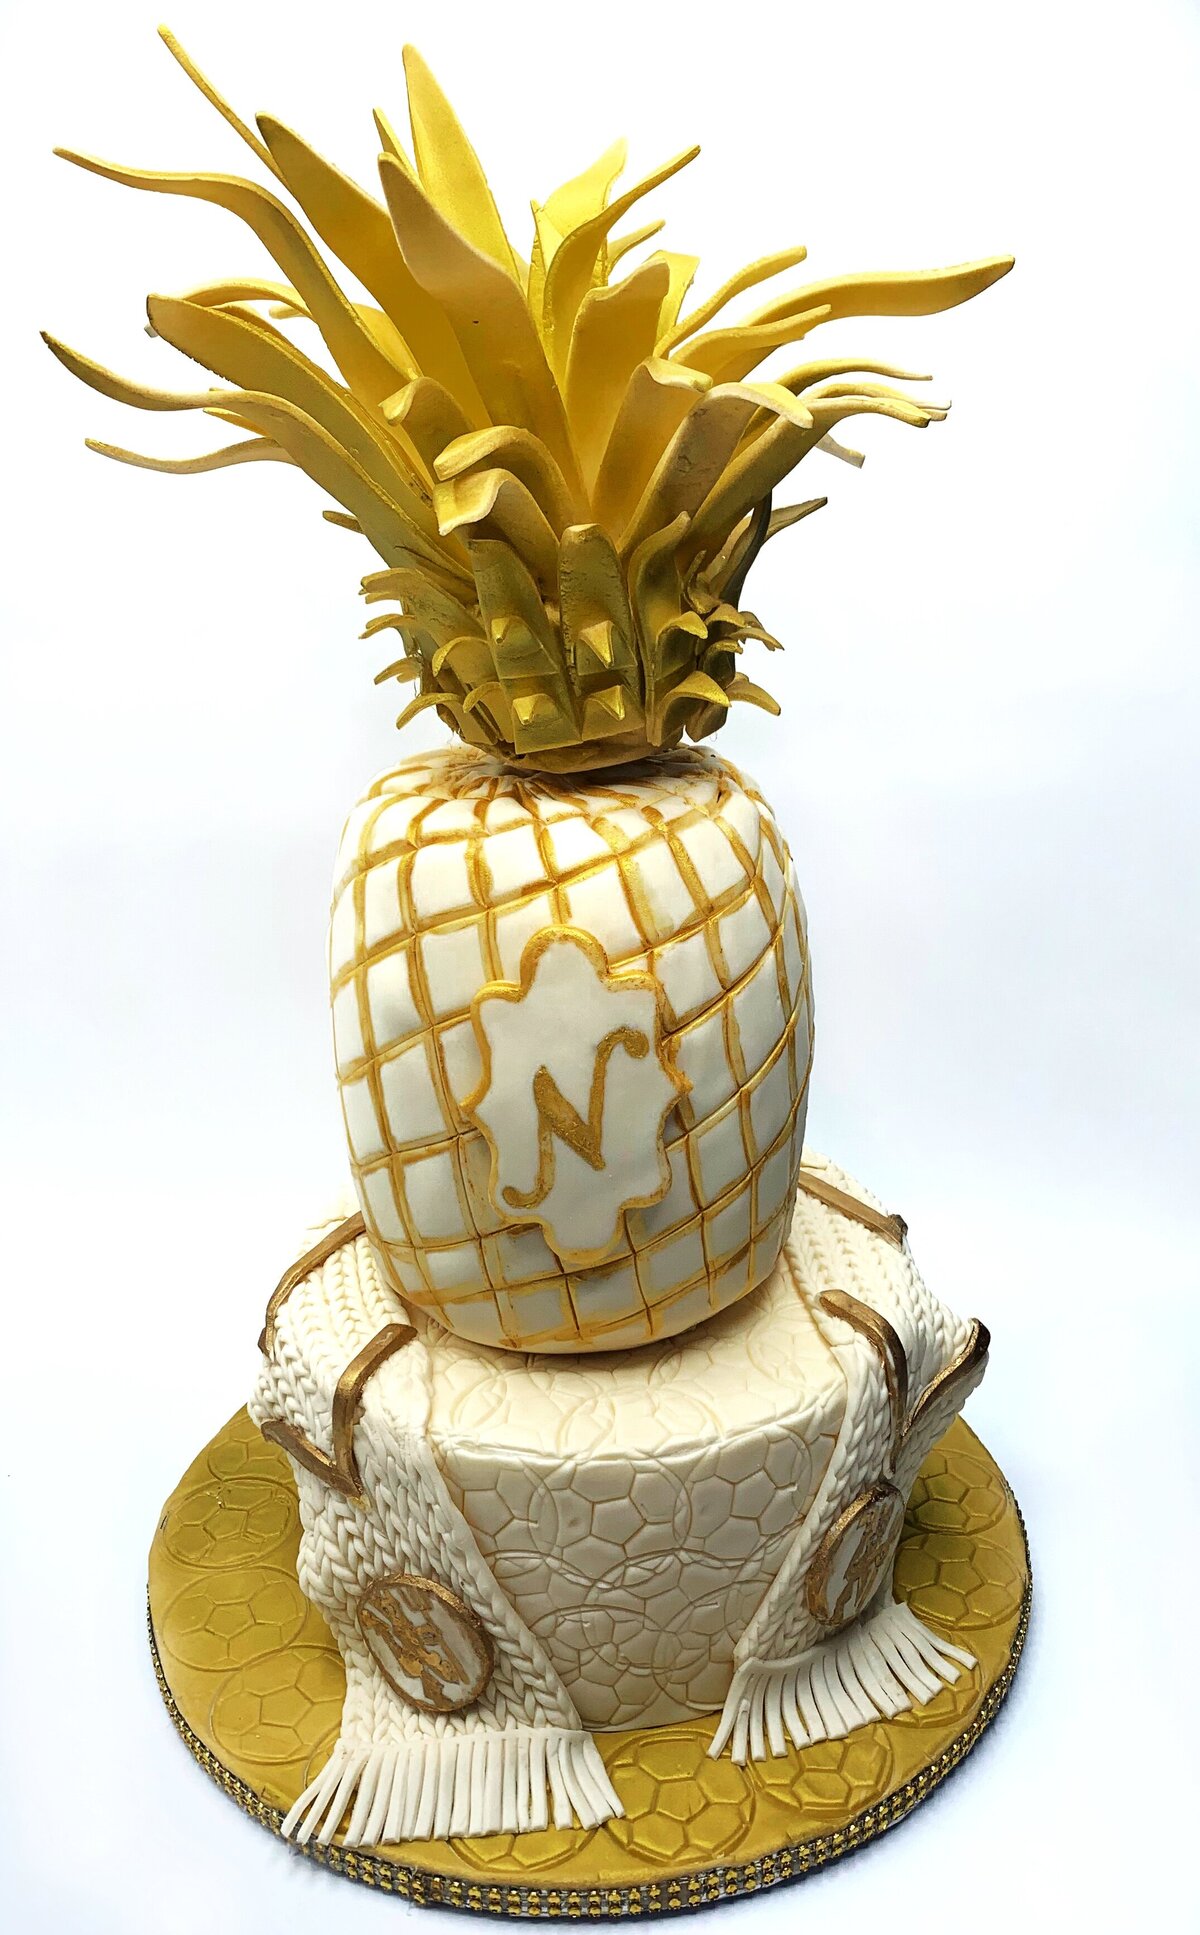 Whiet and gold 2 tier pineapple and soccer theme wedding cake. Top tier is white carved pineapple with gold accents and gold top leaves. Bottom tier is white with embossed soccer balls and wrapped in Manchester United soccer scarf with logos